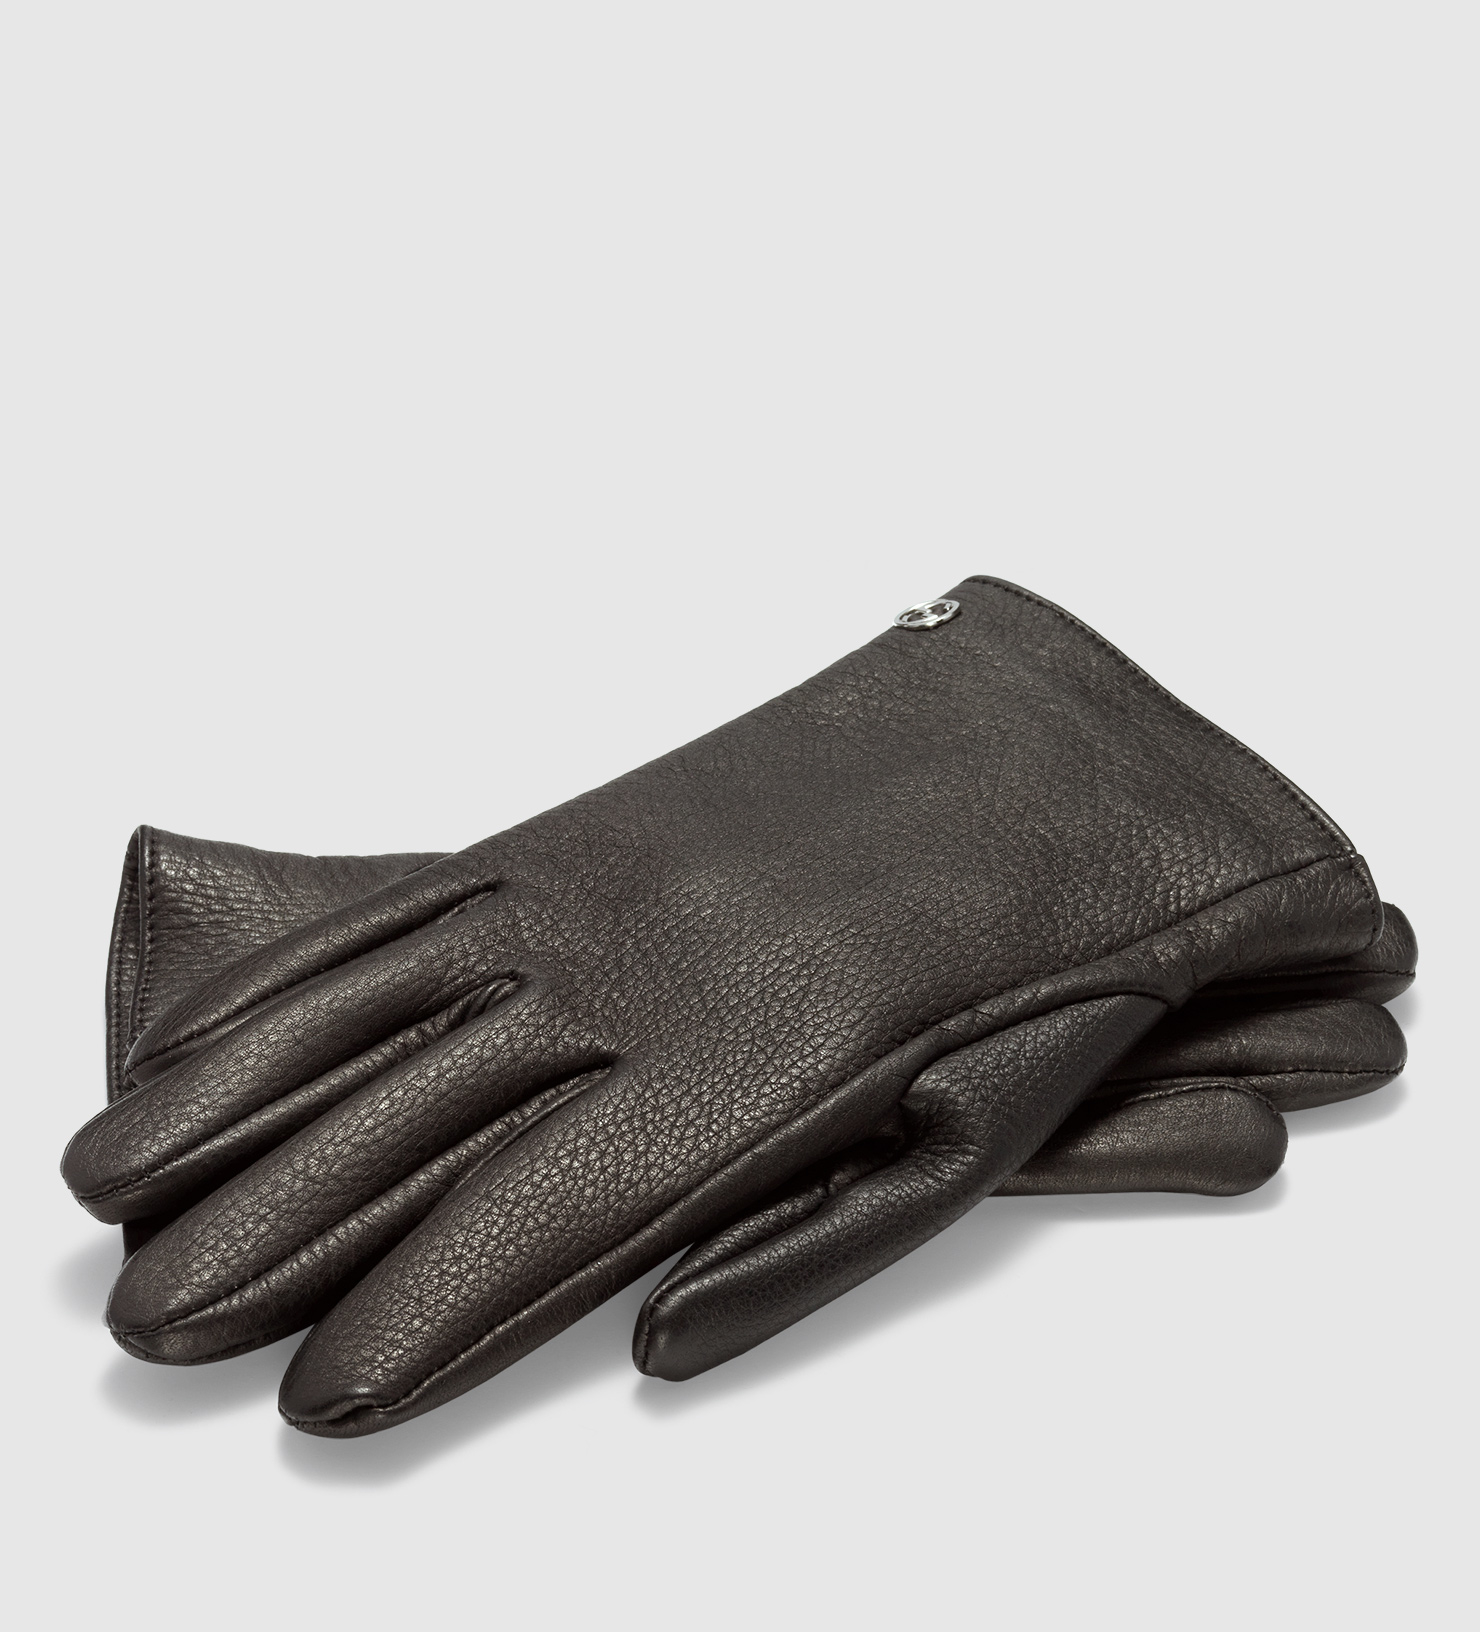 Gucci Men's Leather Gloves in Brown for Men - Lyst